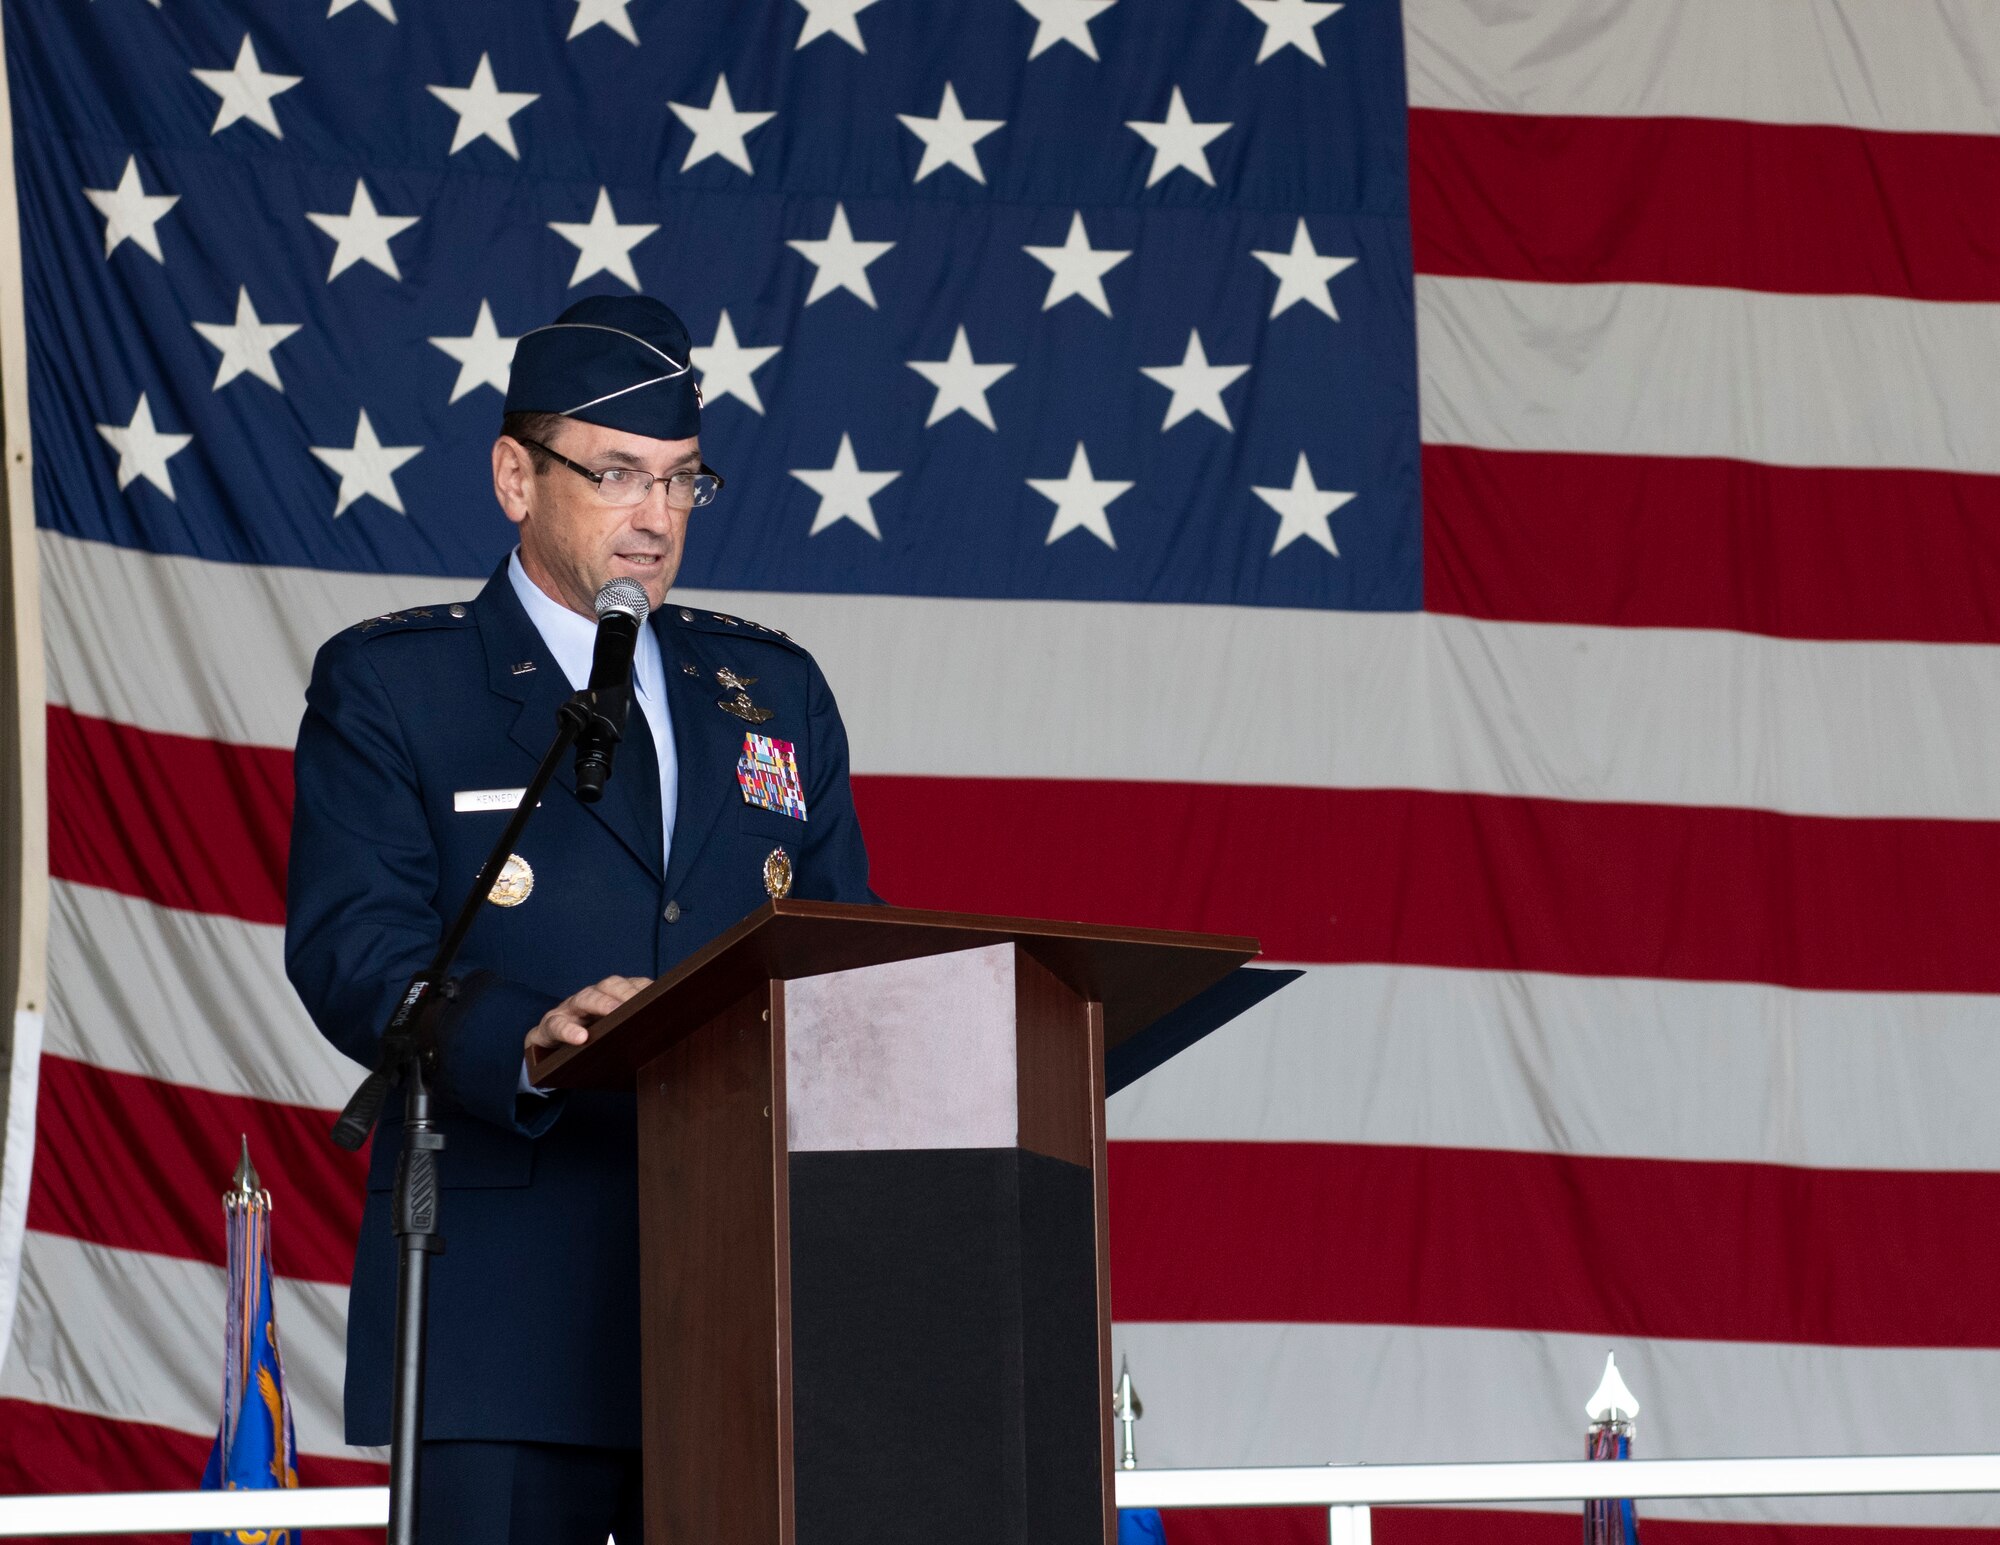 A man speaks at a podium in front of an American flag